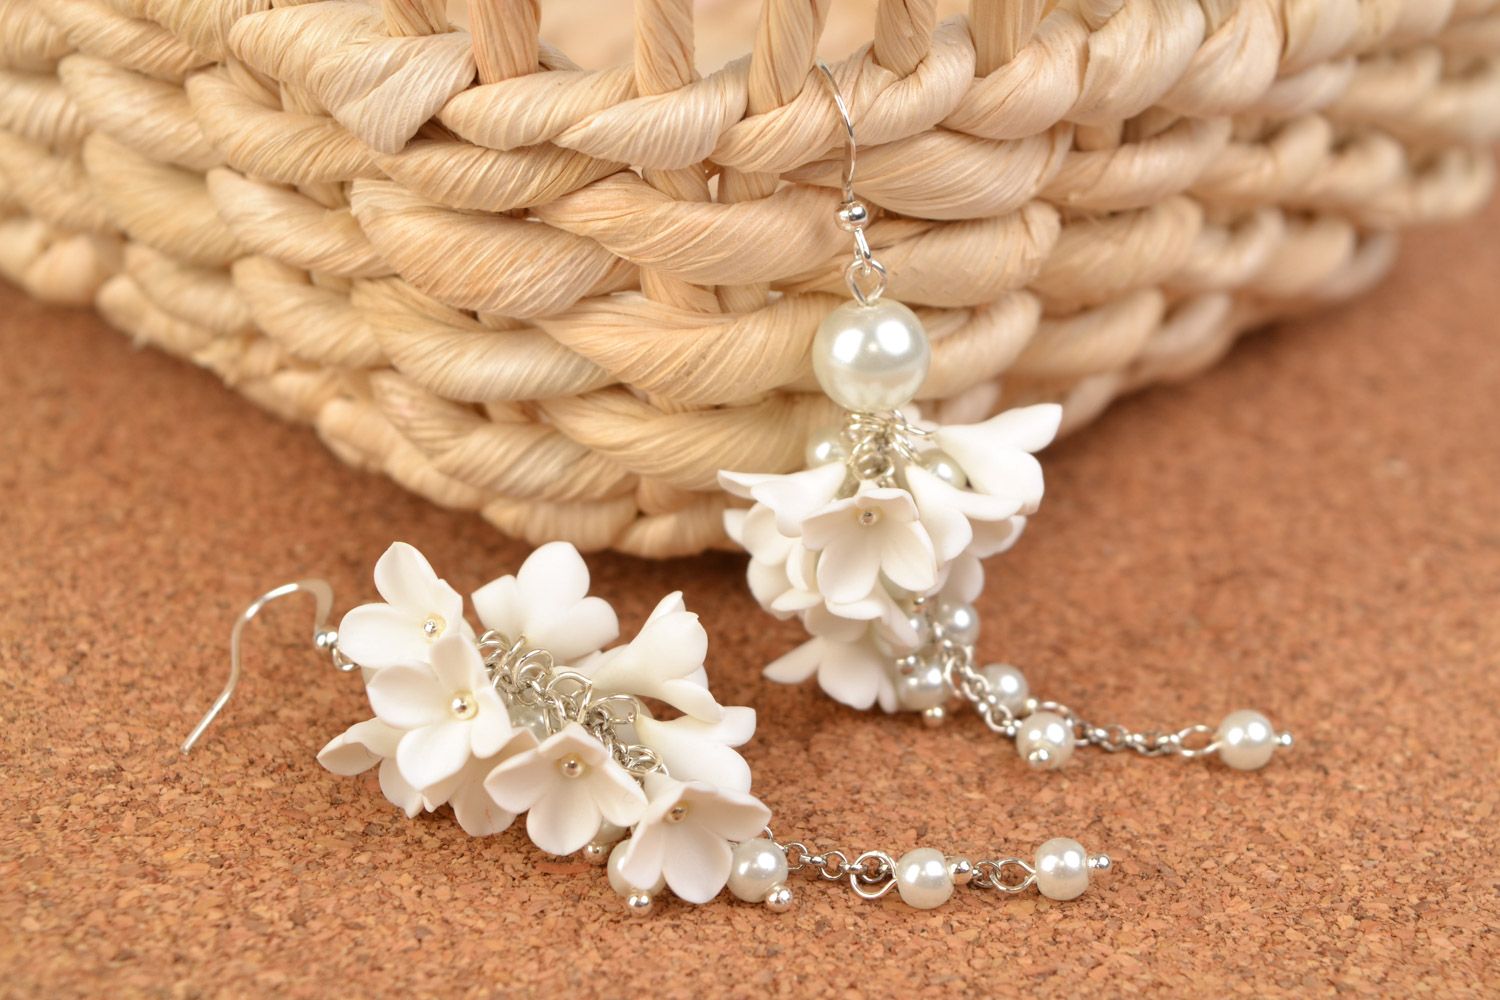 Handmade wedding dangling earrings with white polymer clay flowers and glass beads photo 1